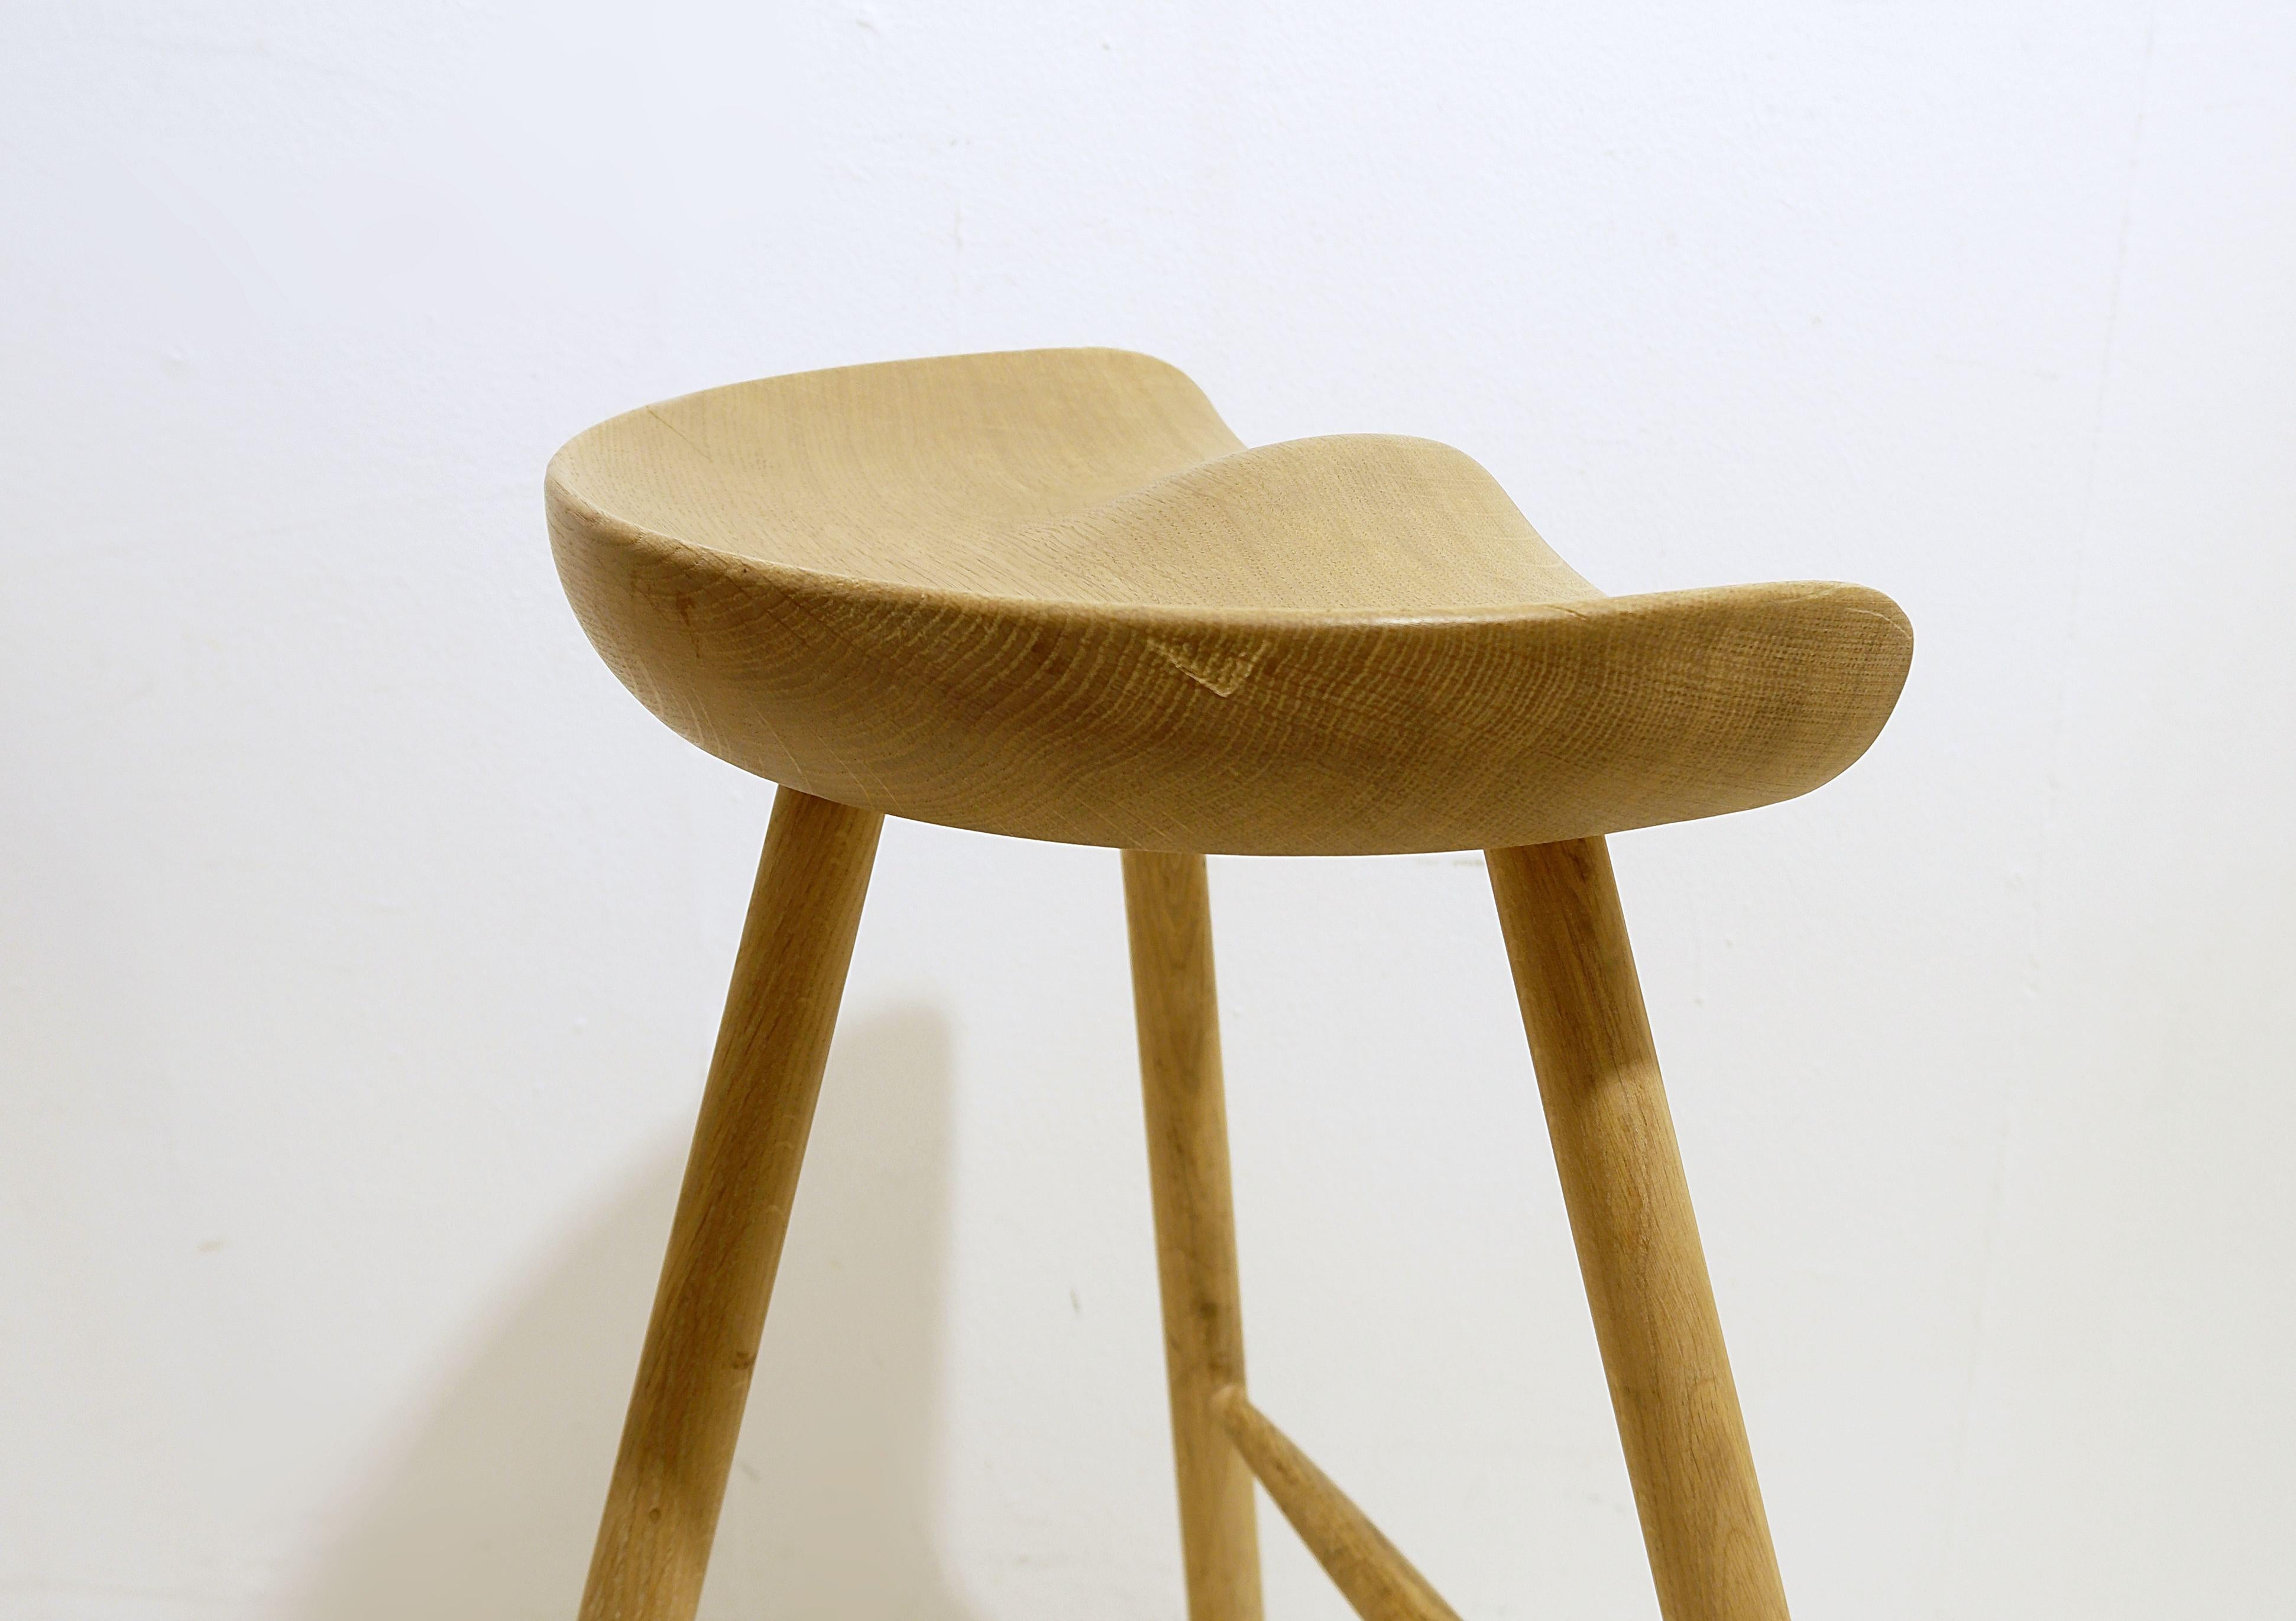 Contemporary 3 Bar Stools by Lars Werner, Form & Refine, Denmark, 2000s